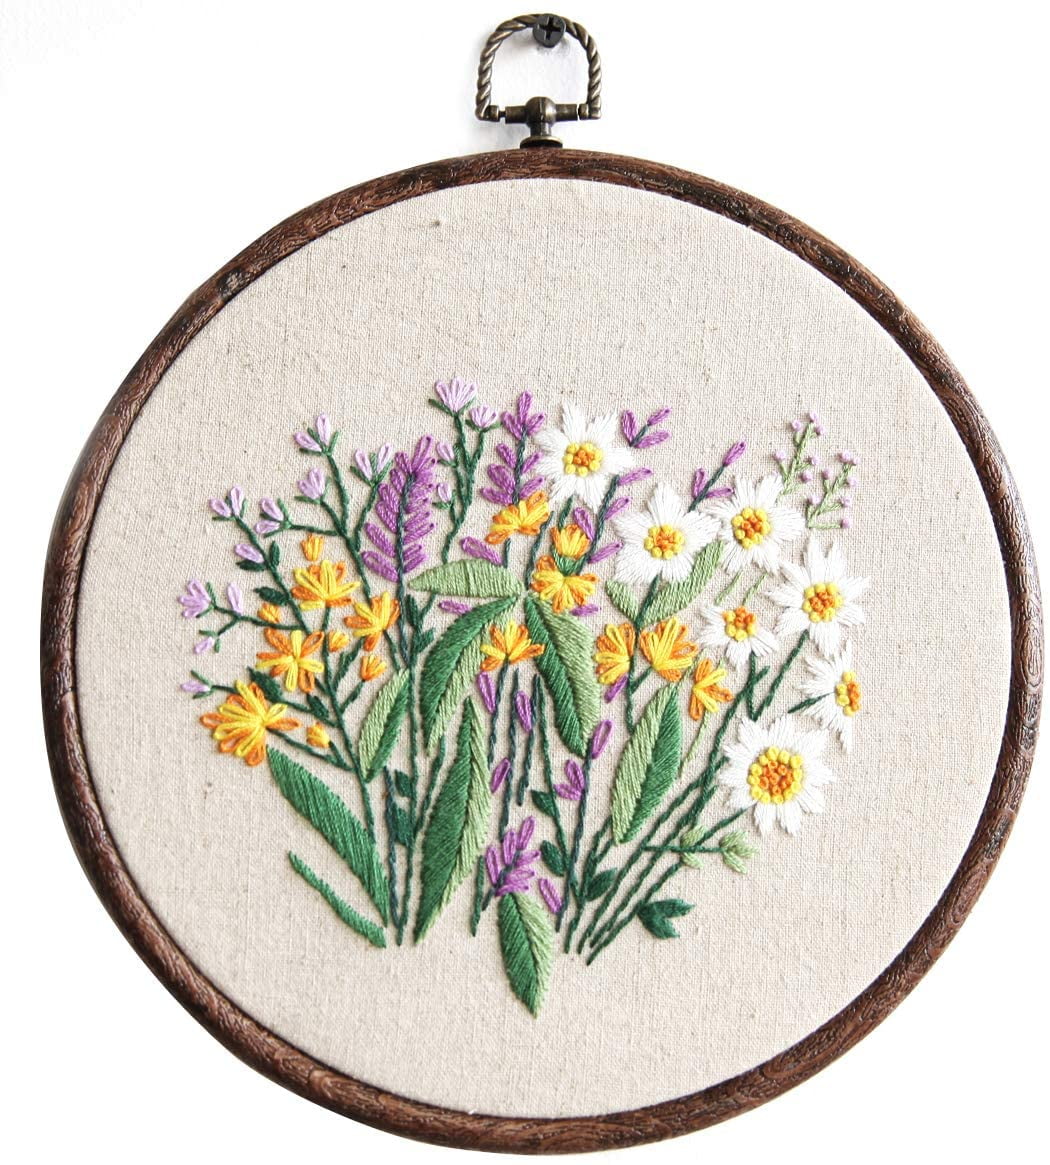 Maydear Stamped Embroidery Kit for Beginners with Pattern, Cross Stitch  kit, Embroidery Starter Kit Including Embroidery Hoop, Color Threads and  Embroidery Scissors - Butterflies Love Flowers 